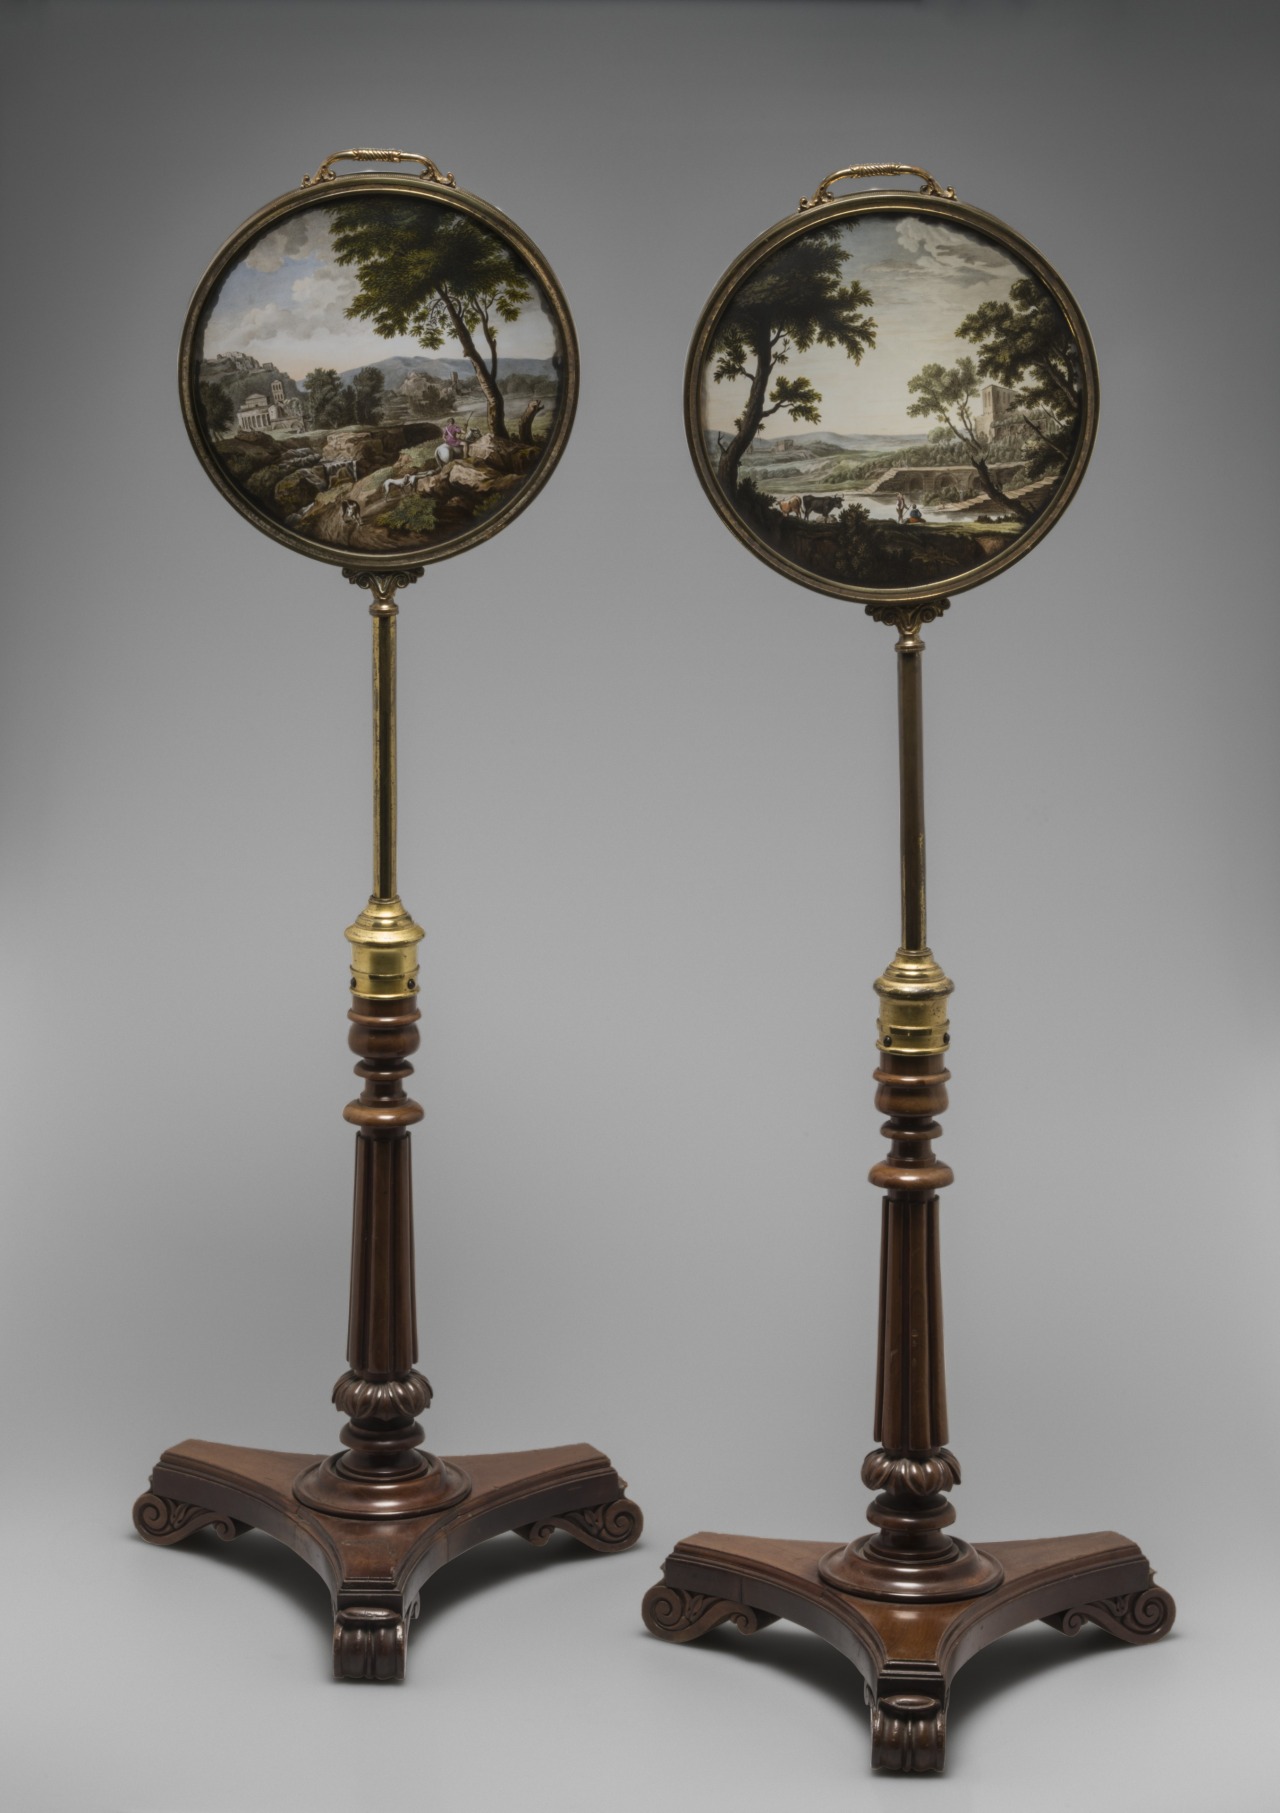 cmog:
“  Object of the Week: Pair of Fire Screens, James Pearson, London, England, 1800. 2018.2.9 A, B.
These fire screens are perfect for chilly days cozying up by the fire. Portable fire screens were used to temper the intensity of the heat from a...